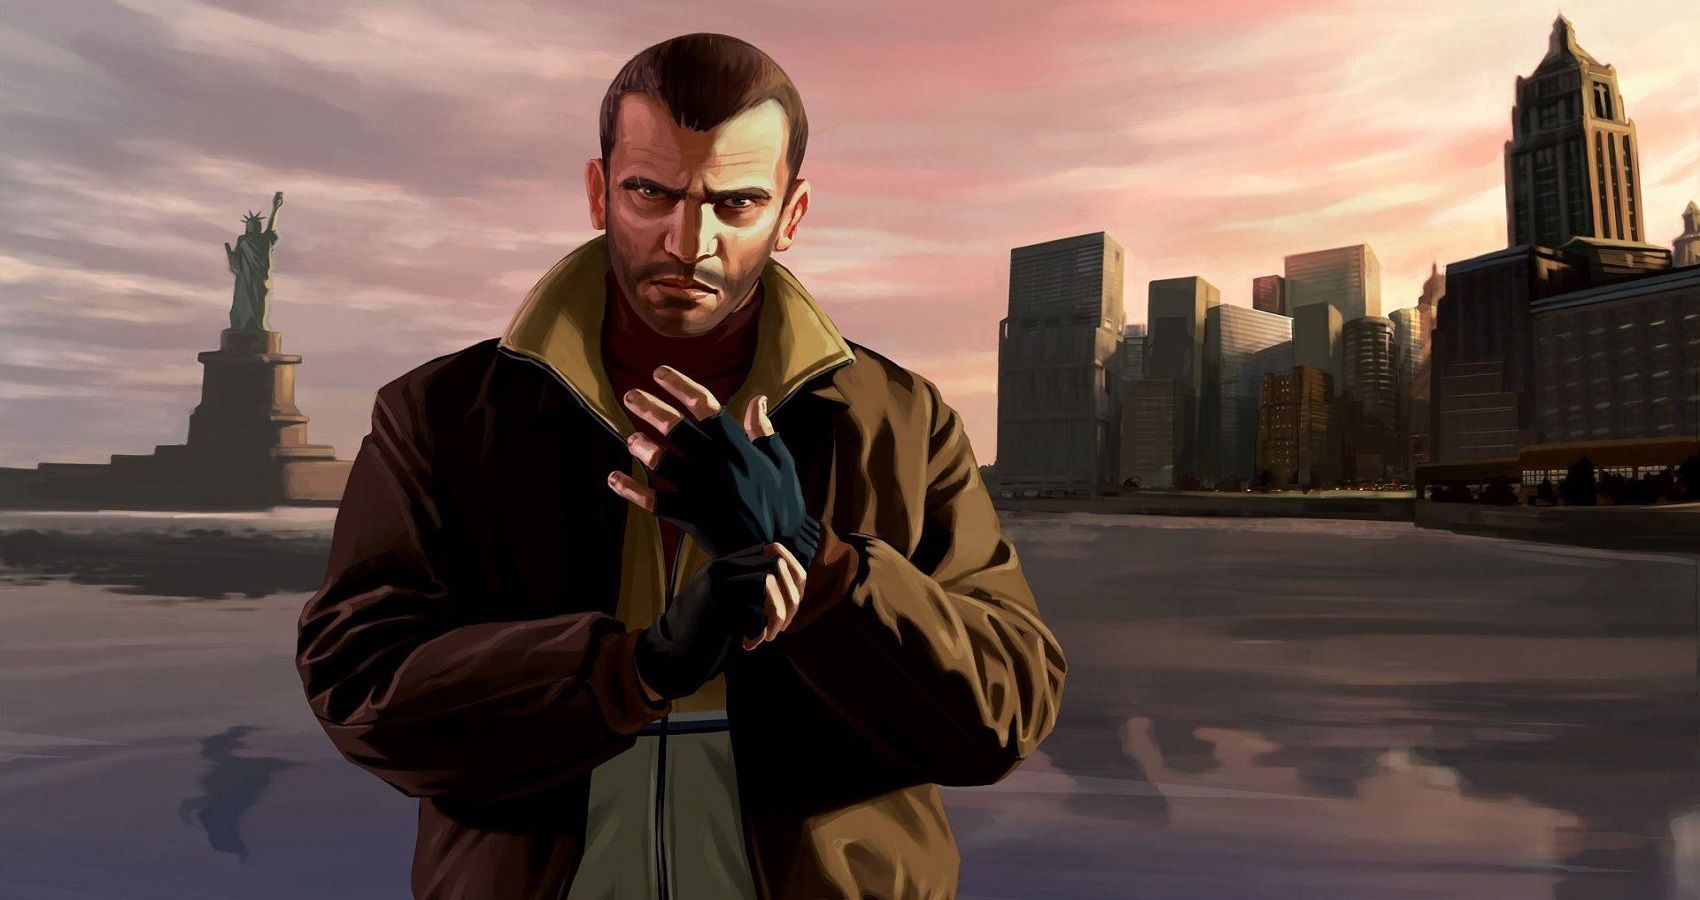 Grand Theft Auto IV: 10 Storylines That Were Never Resolved